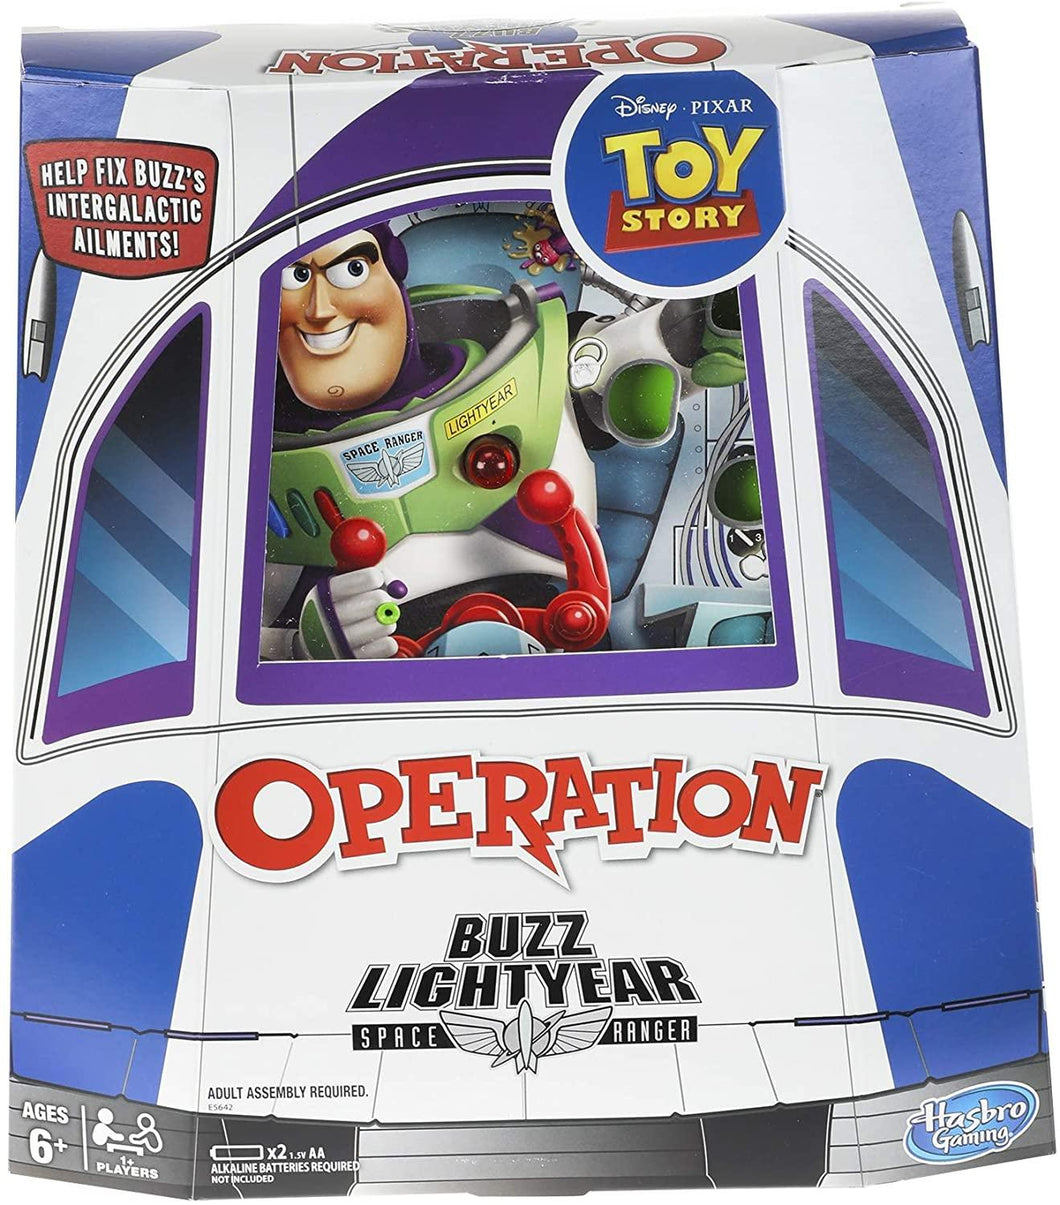 Operation Toy Story